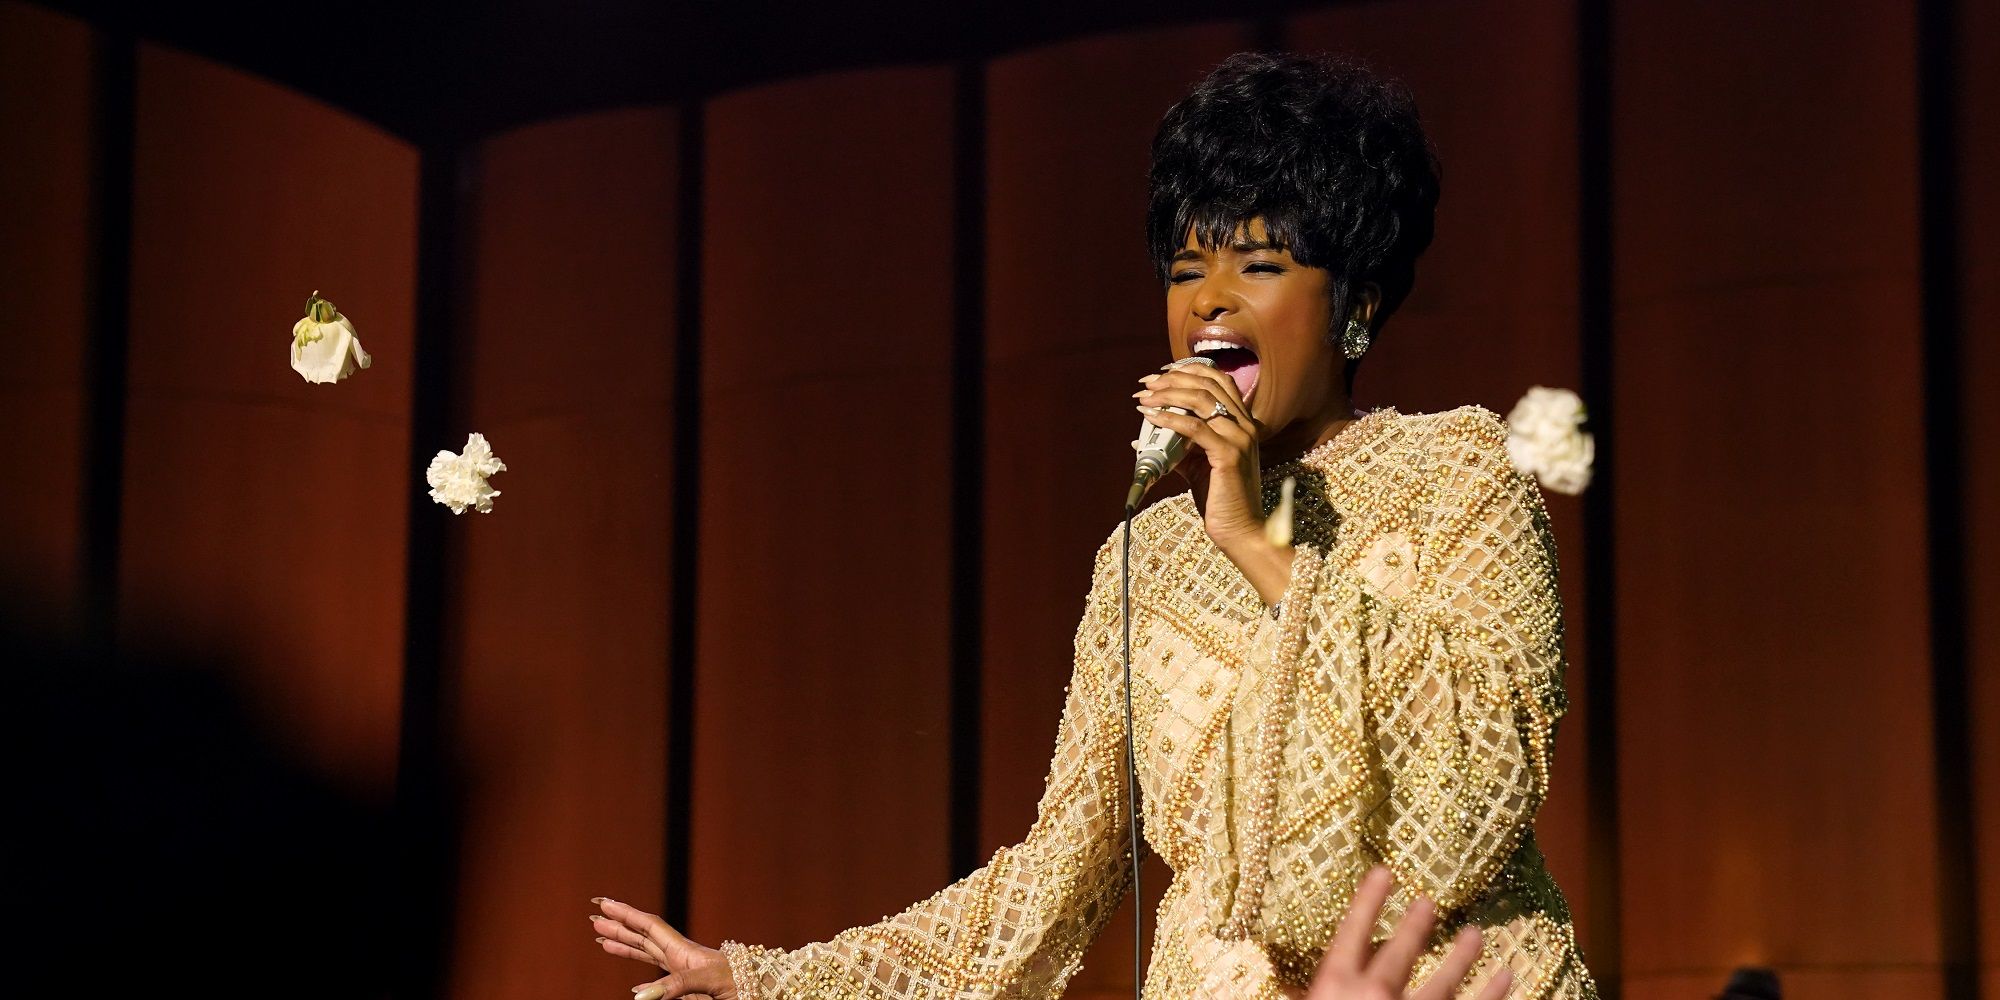 Aretha Franklin sings on stage in Respect